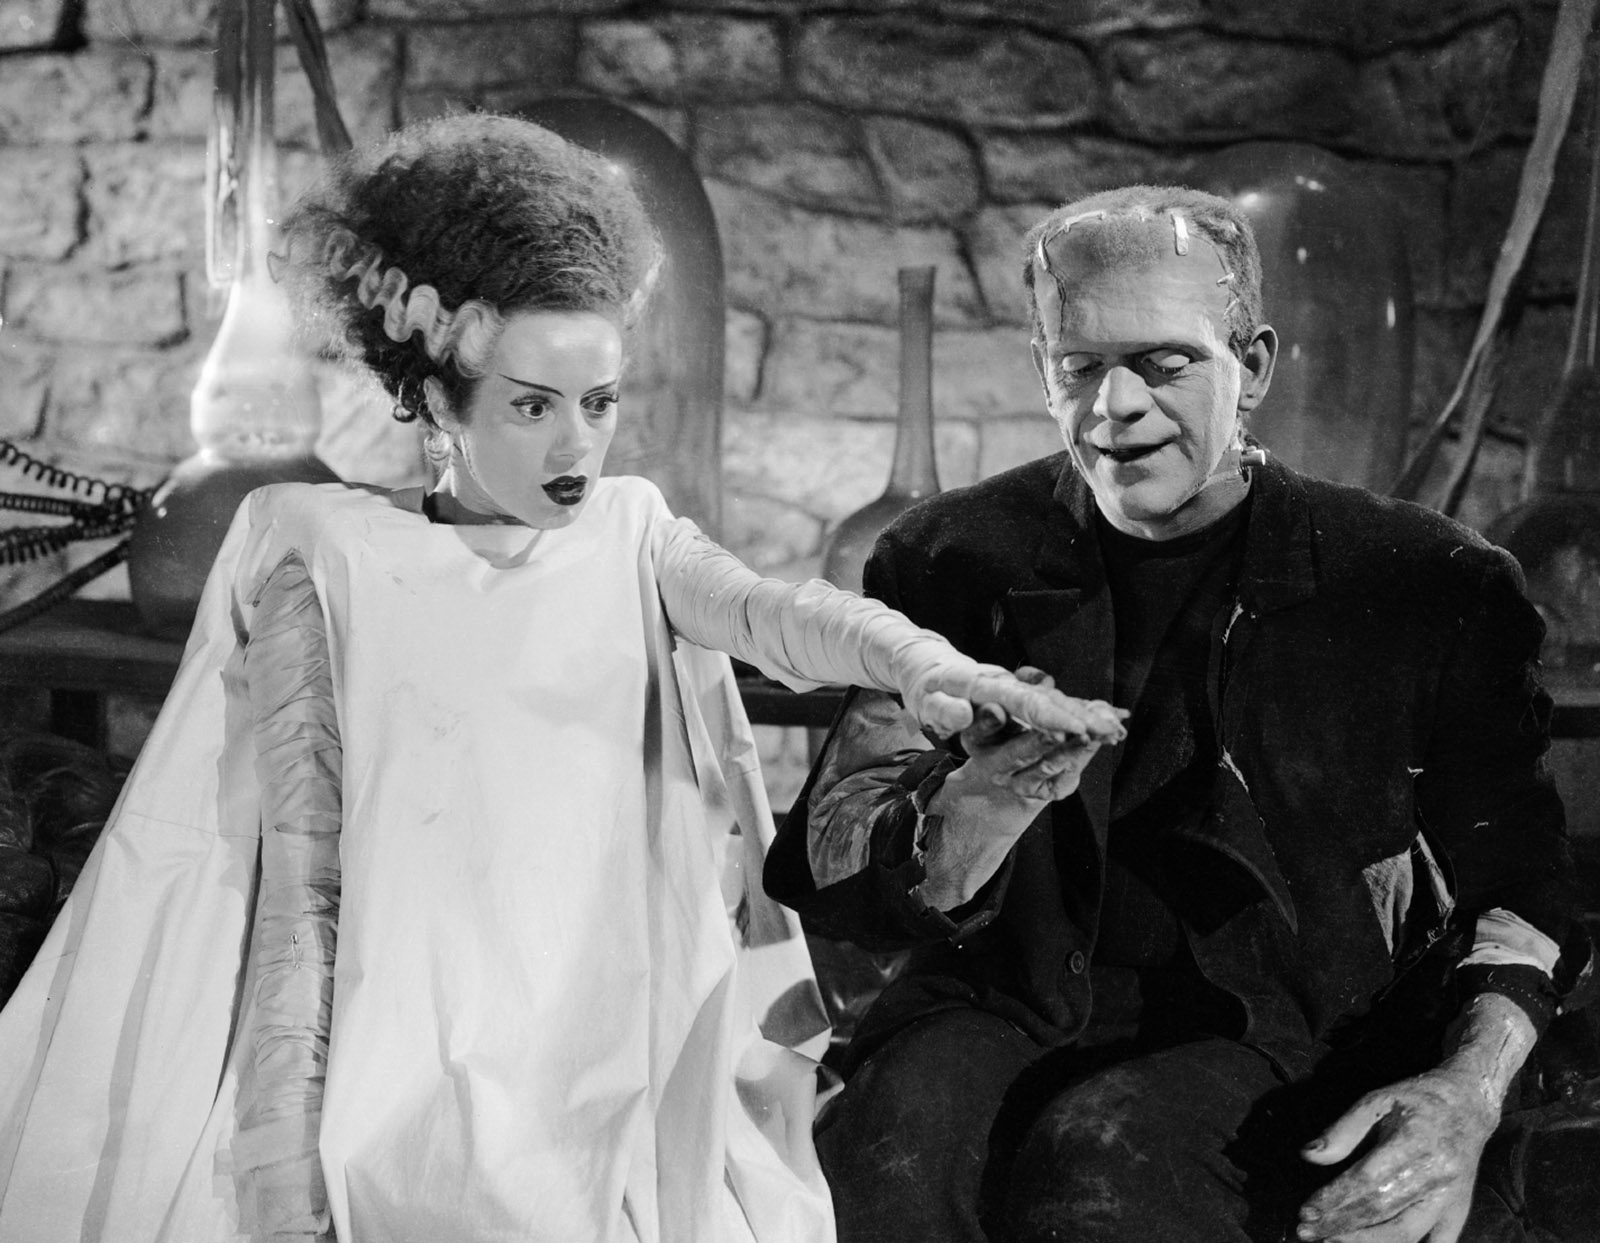 Elsa Lanchester and Boris Karloff in The Bride of Frankenstein, directed by James Whale, 1935